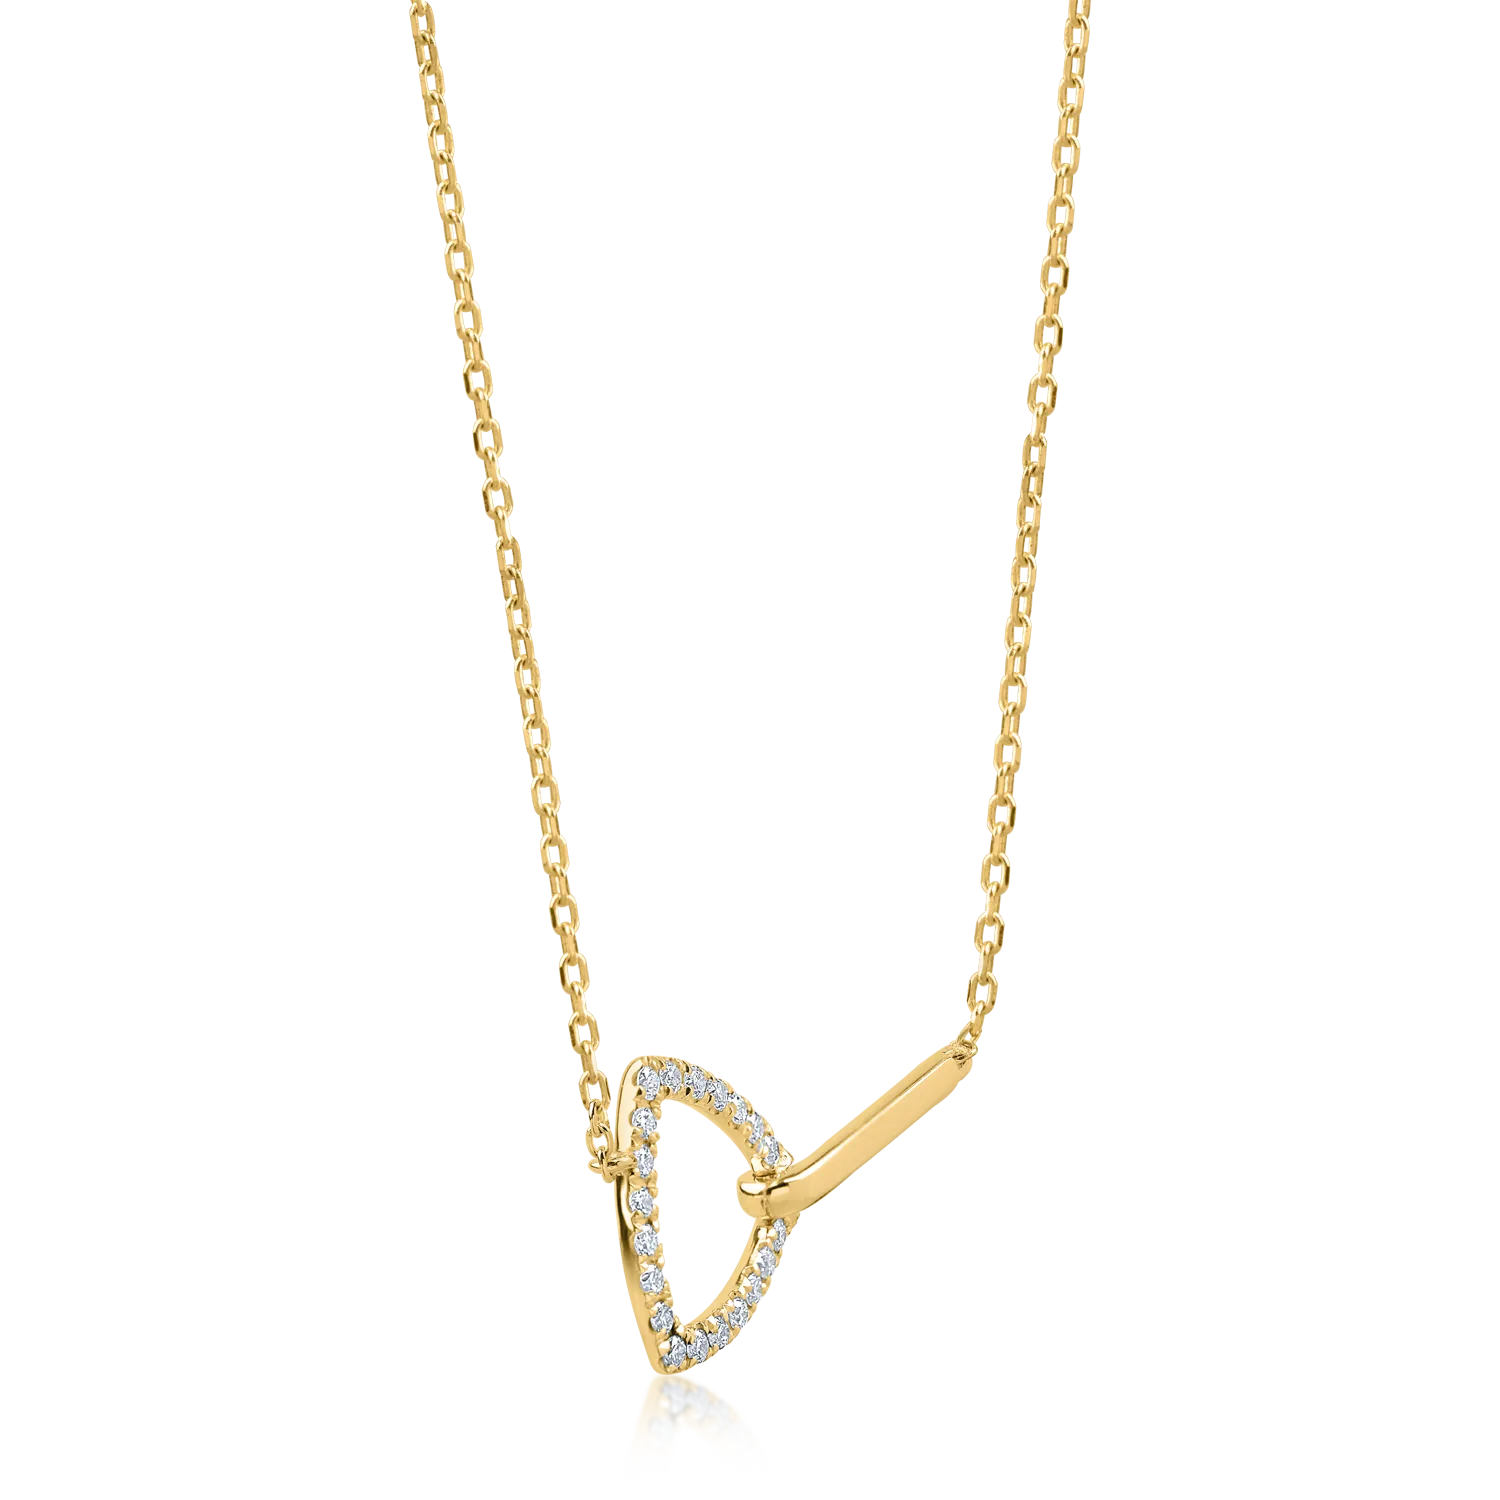 Yellow gold pendant necklace with 0.17ct diamonds